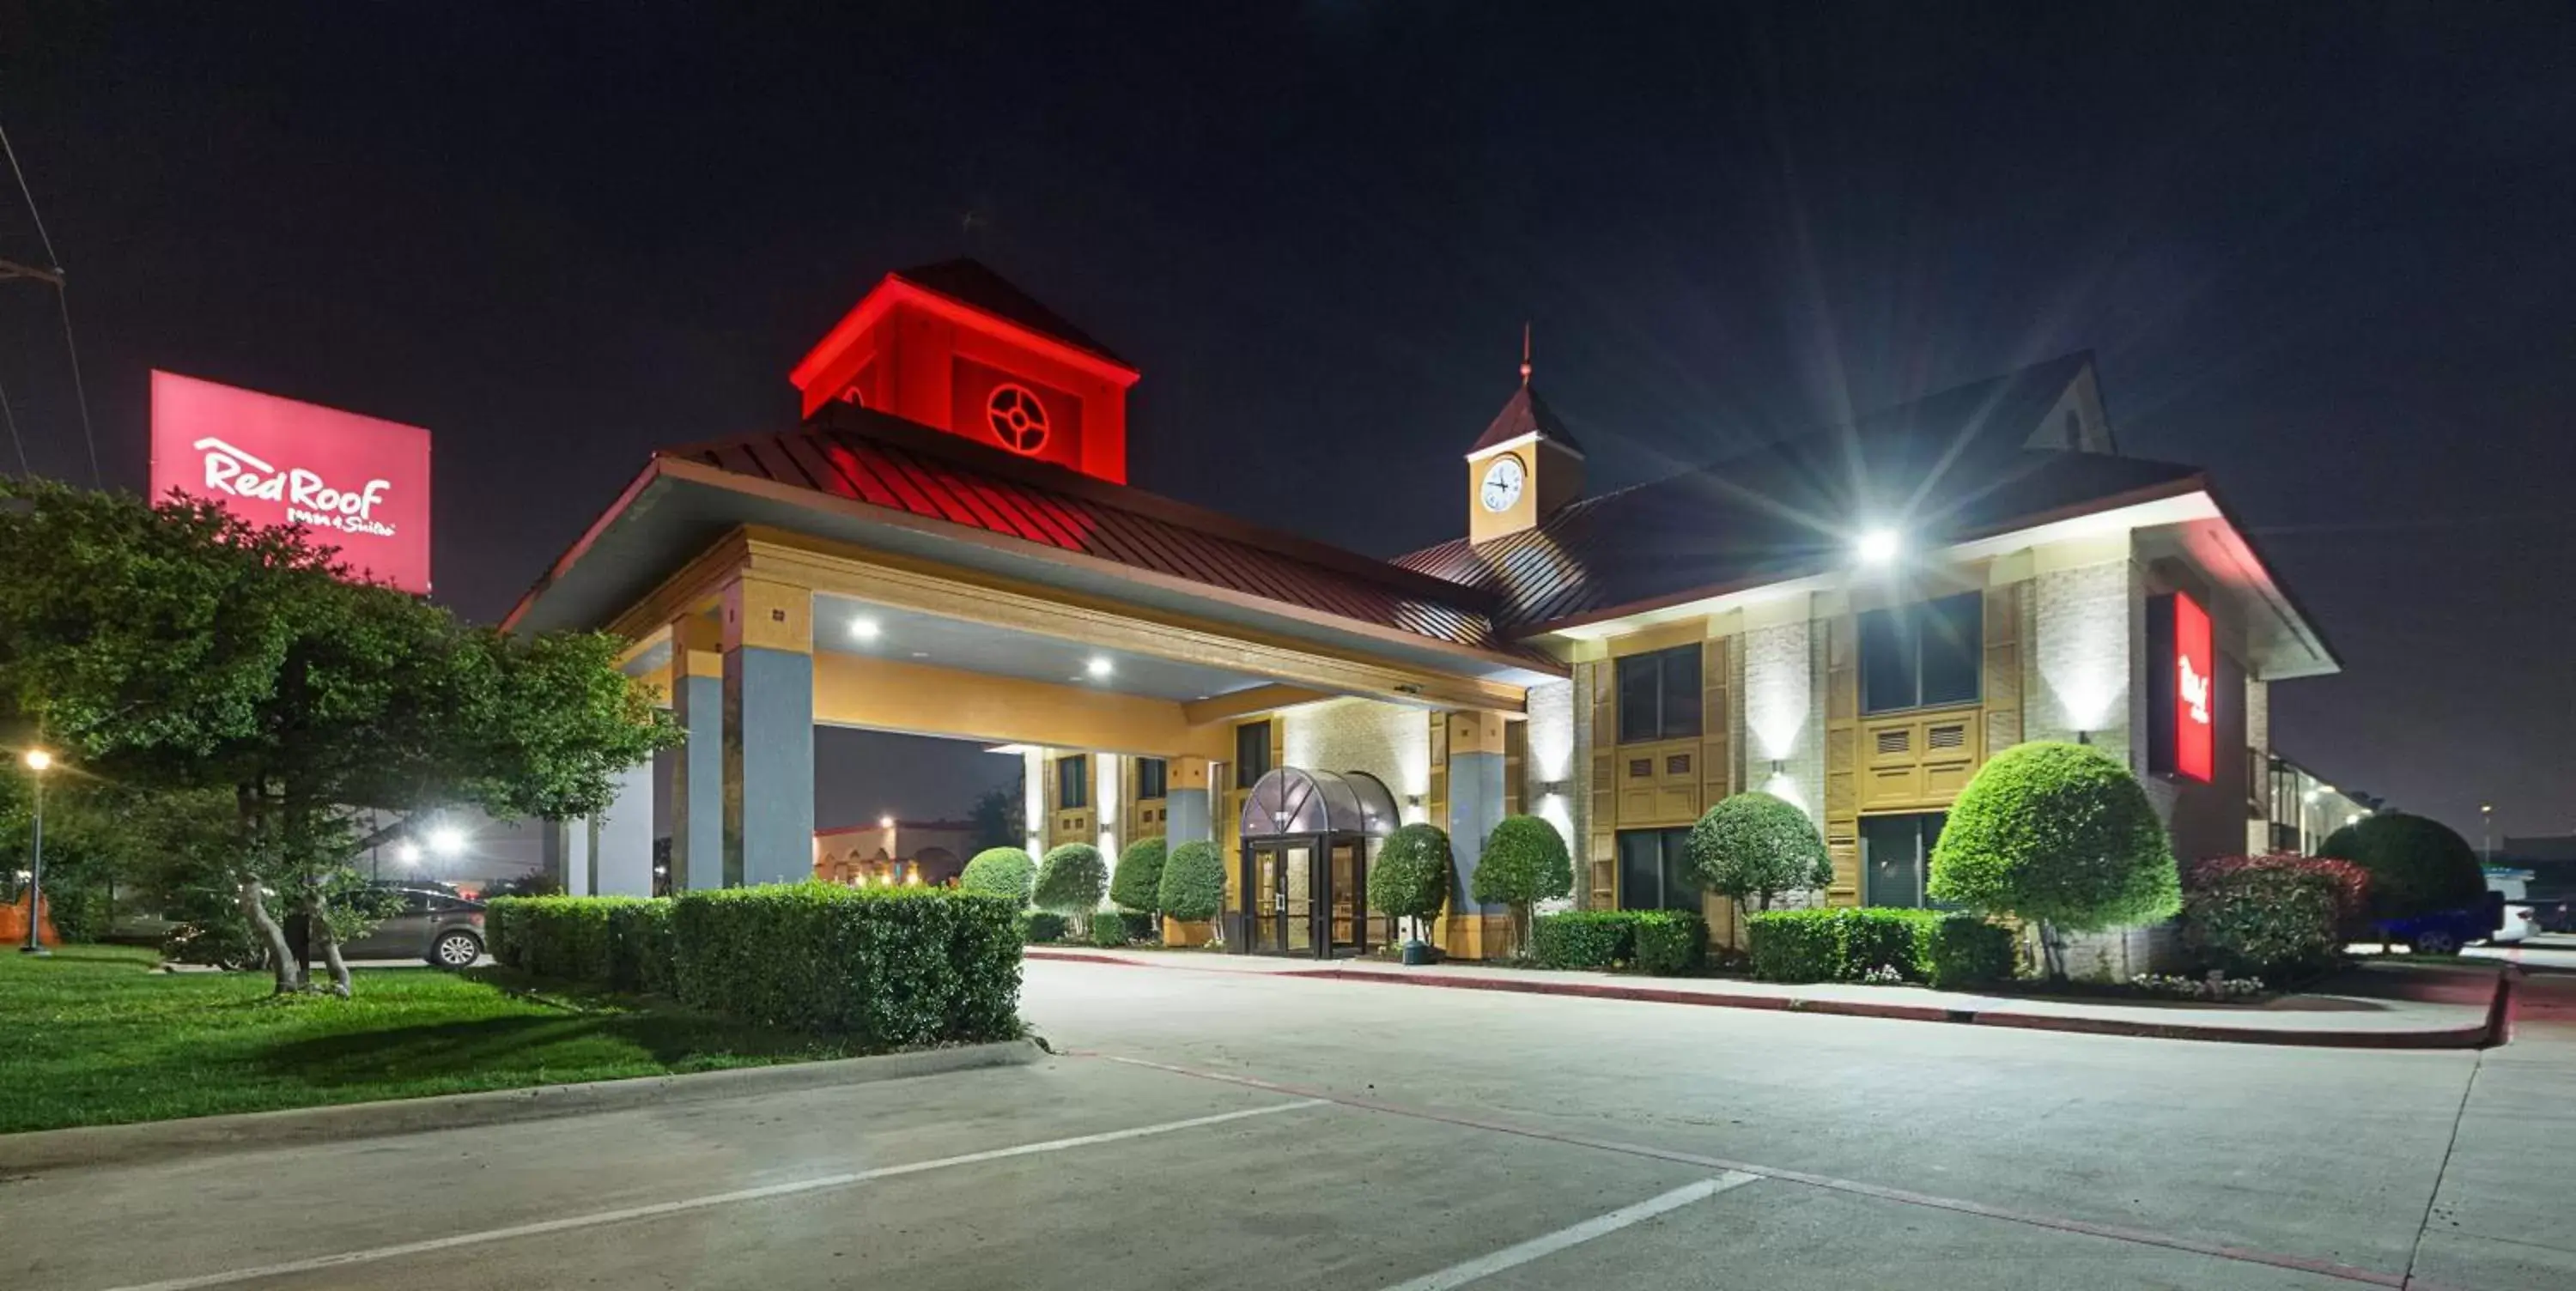 Property building, Facade/Entrance in Red Roof Inn PLUS+ Dallas - Addison